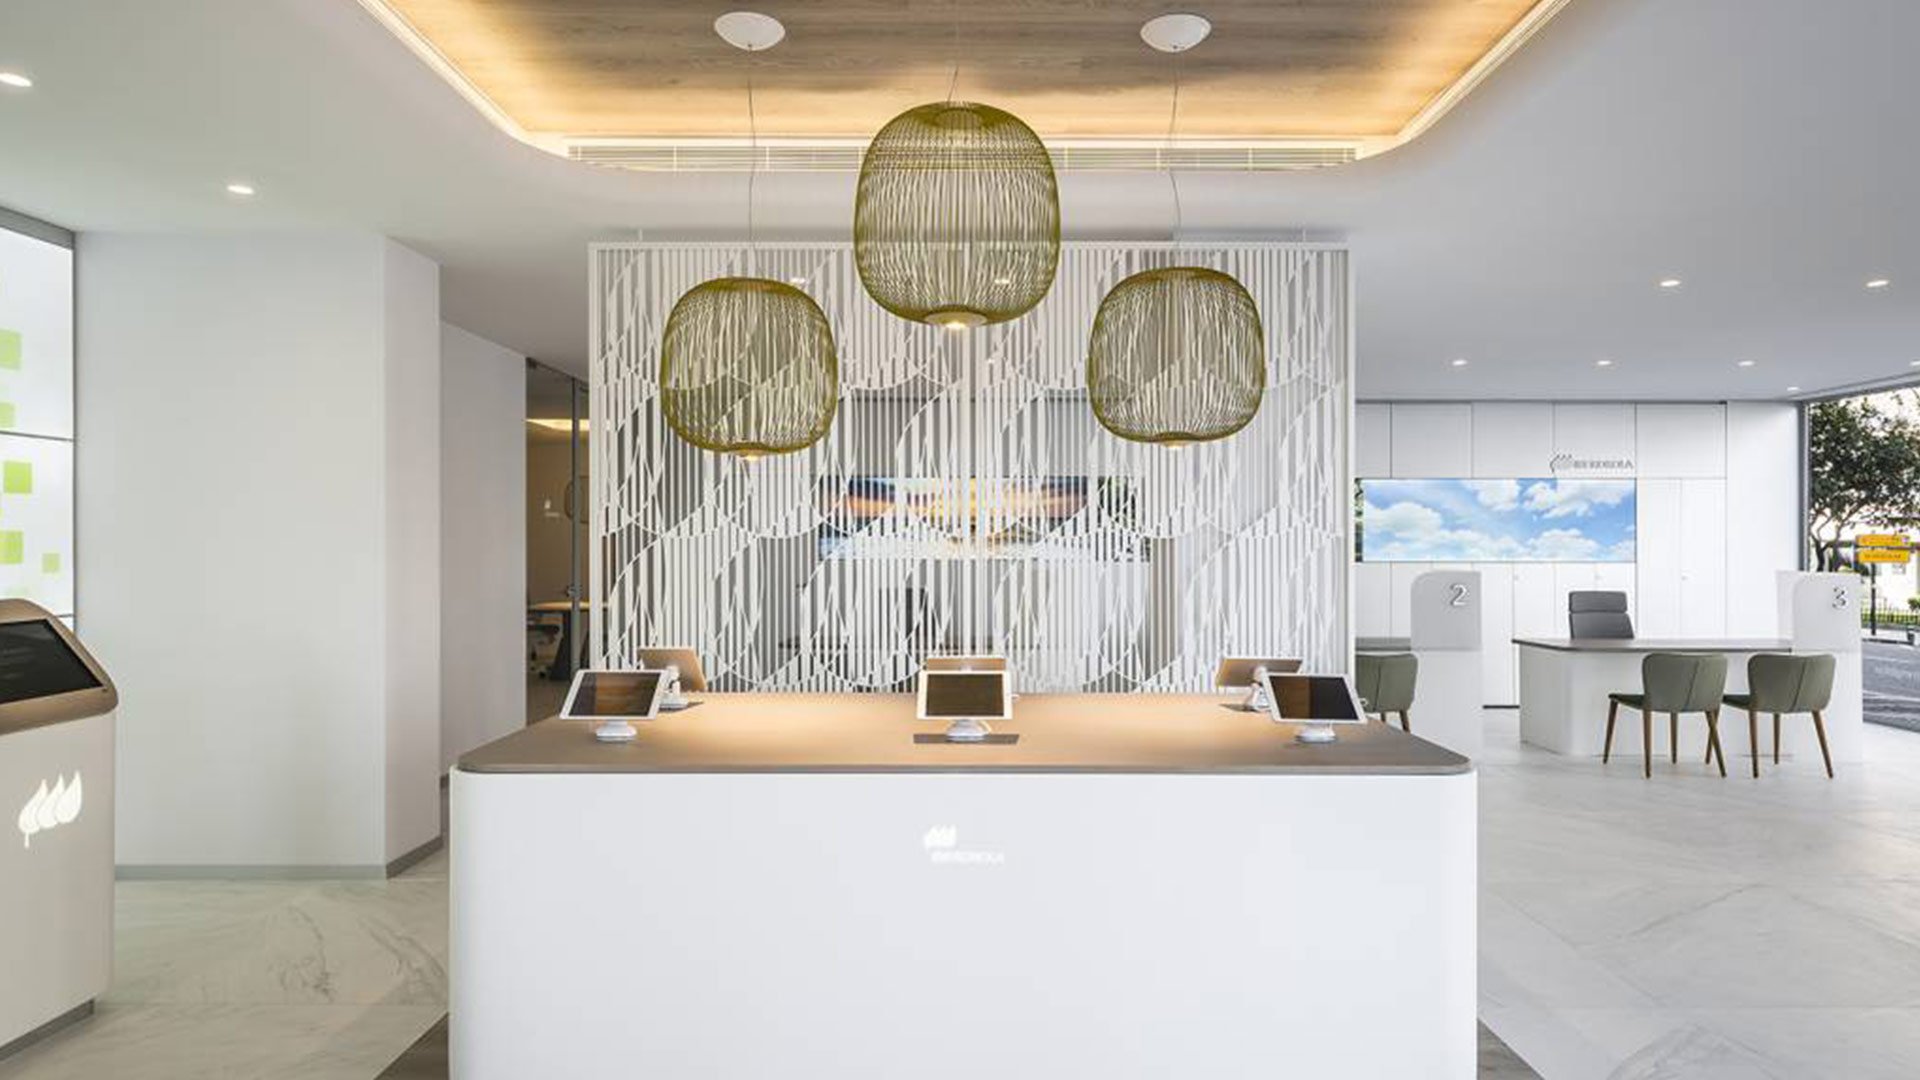 Project management and interior design of the Iberdrola offices